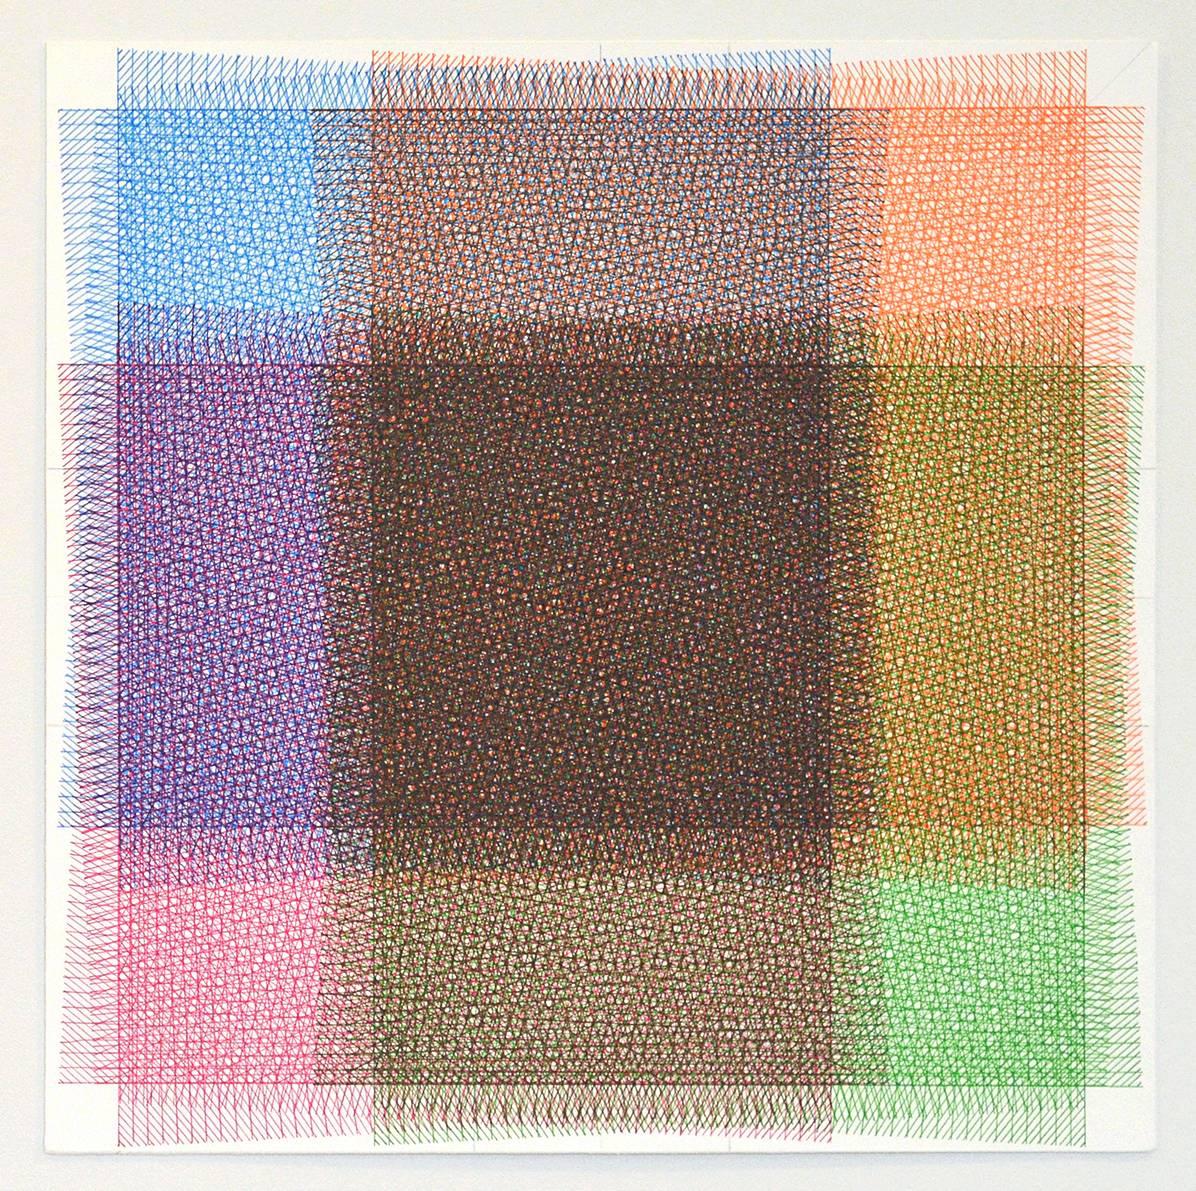 Sara Eichner, 32 Layers of Rectangles, 2016, Minimalist Abstraction, Ink